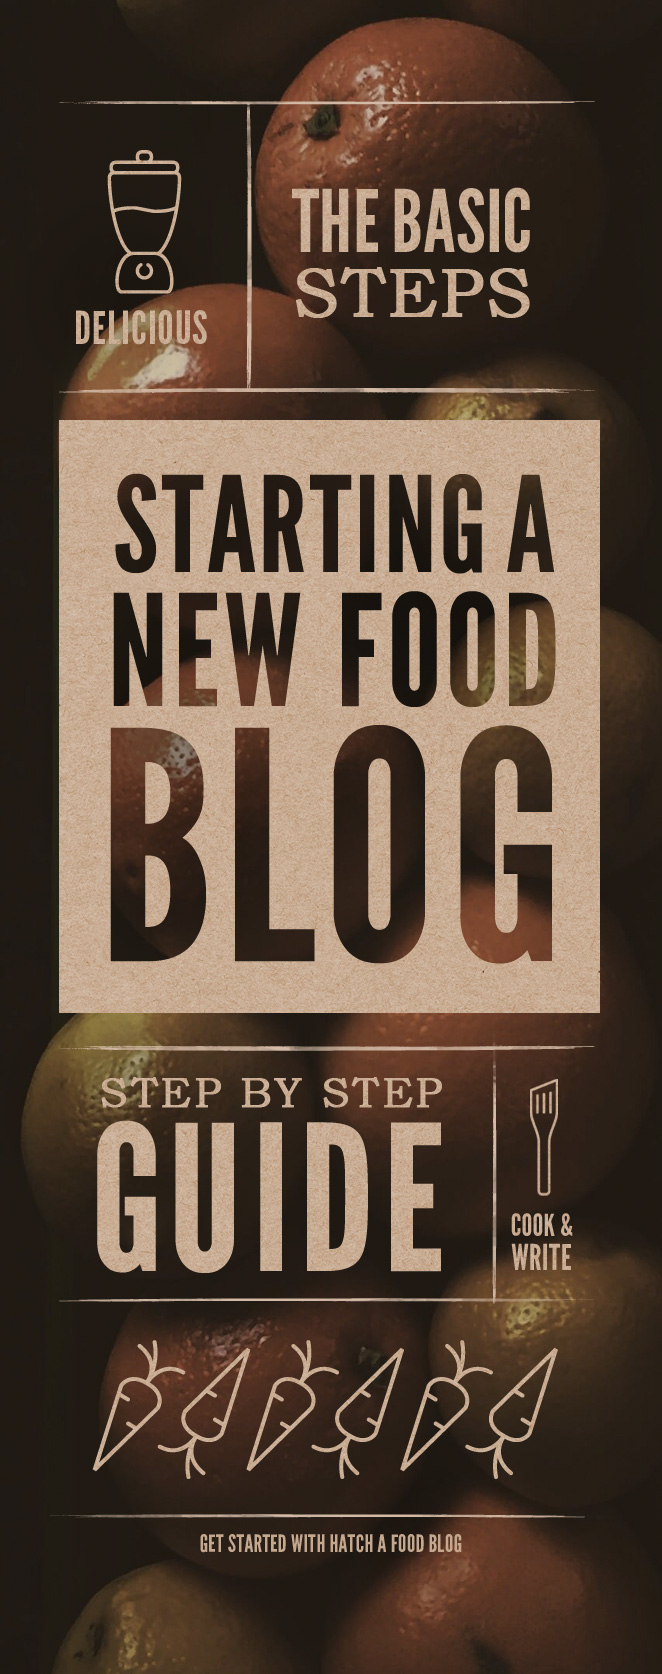 How To Start A Food Blog